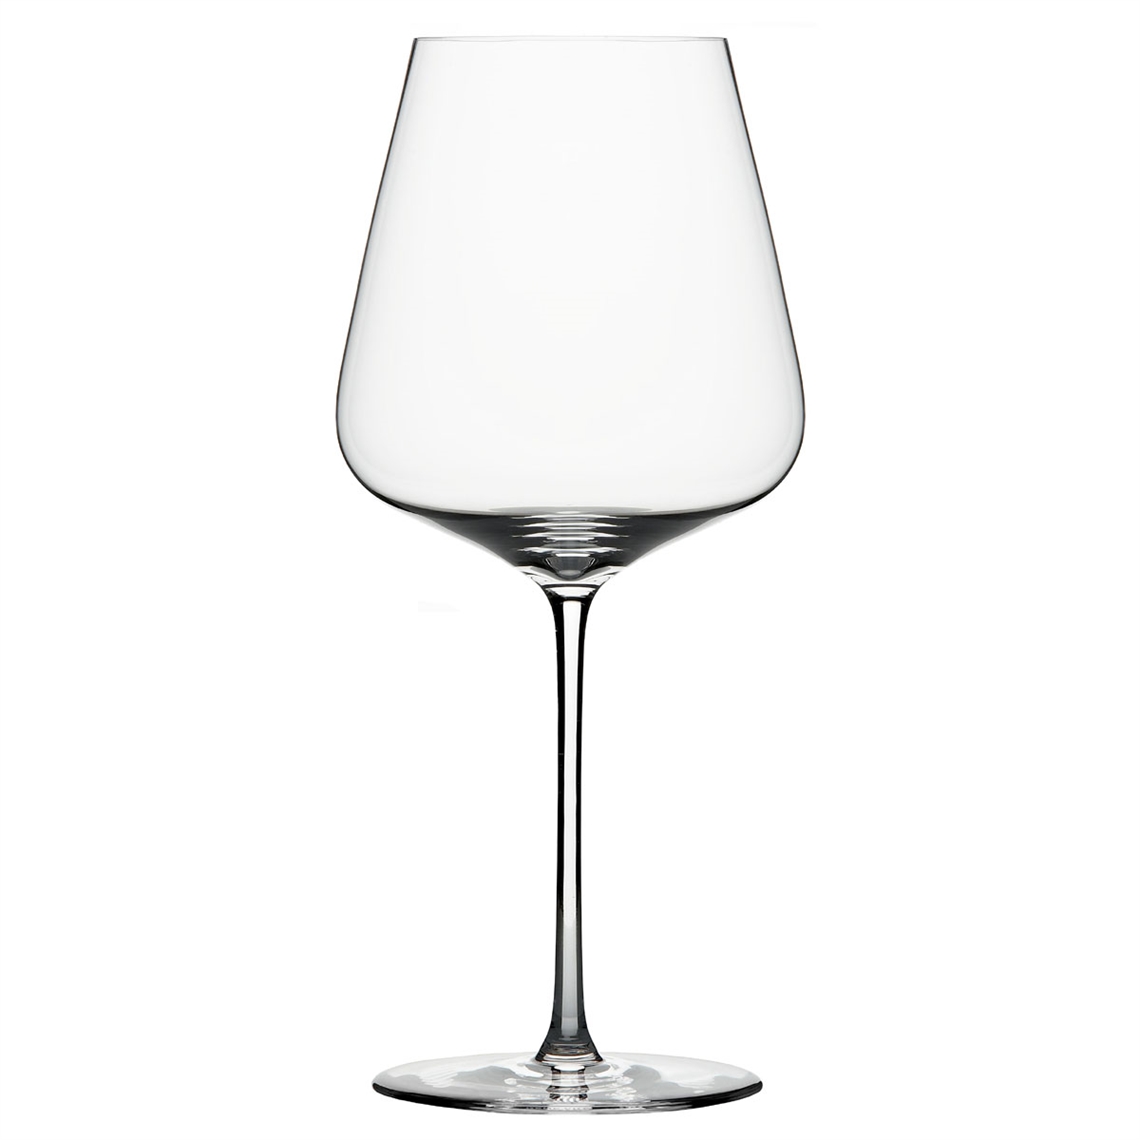 View more whisky glasses from our Premium Mouth Blown Glassware range